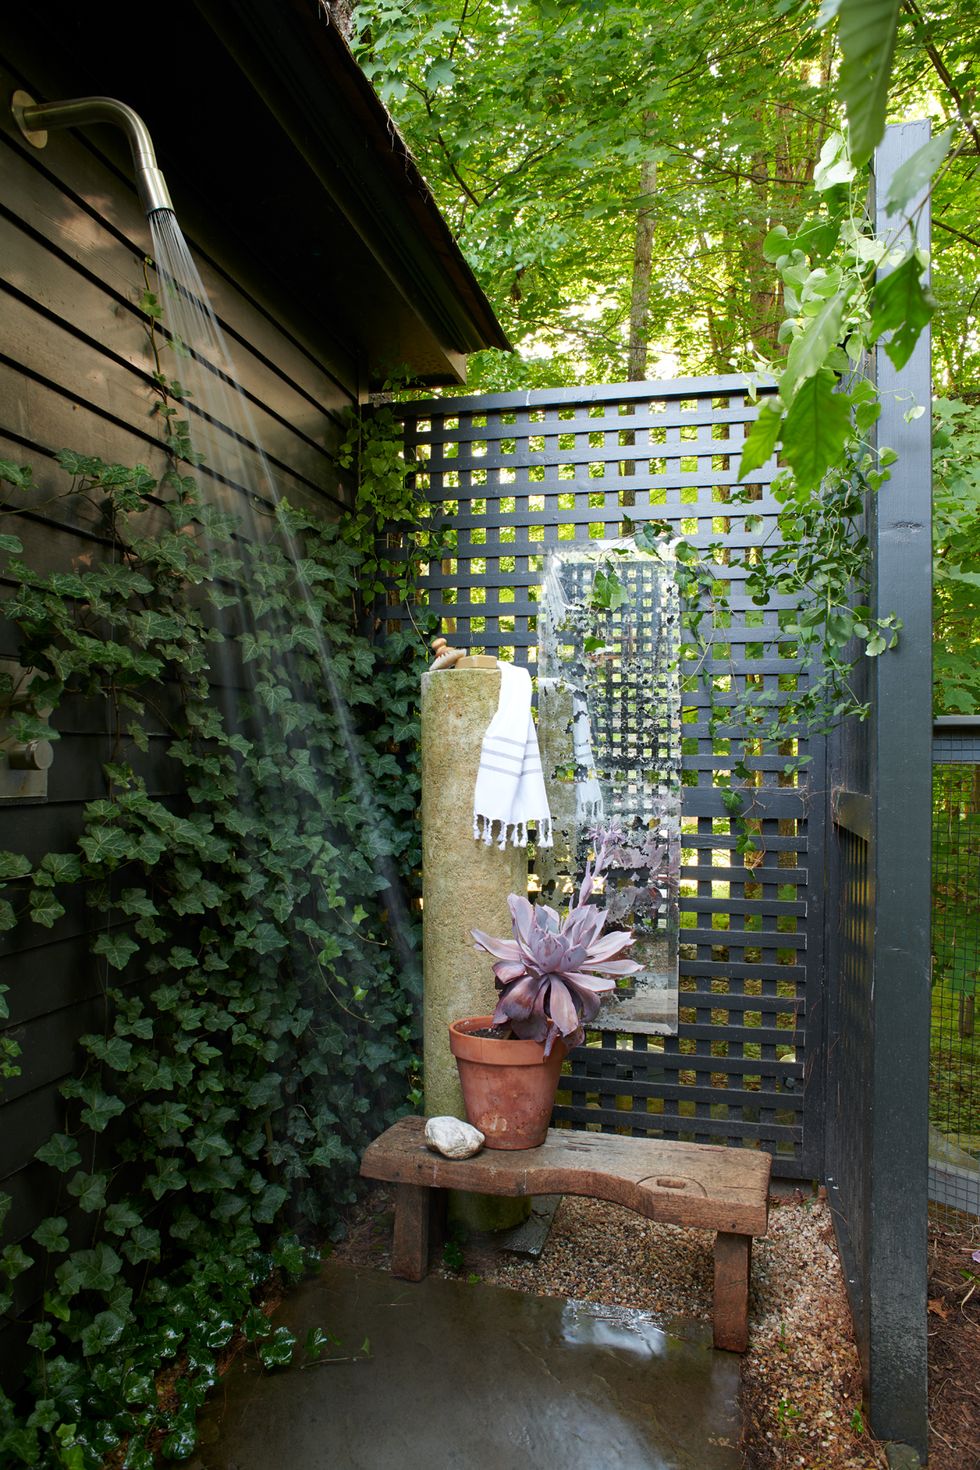 Create Your Own Outdoor Oasis with These Freestanding Outdoor Shower Ideas